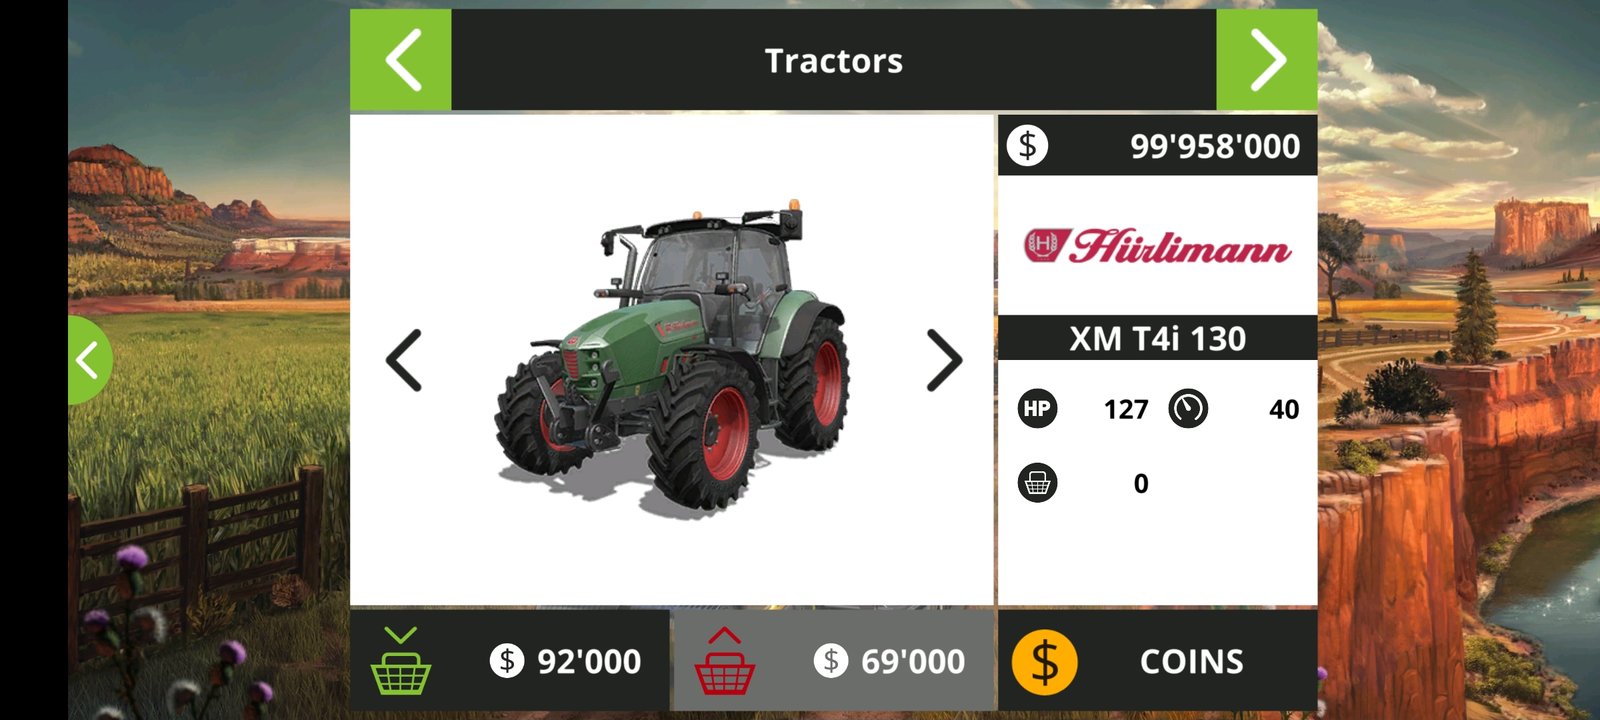 Download Farming Simulator 20 MOD APK v0.0.0.86 - Google (Vehicle price is  0) for Android